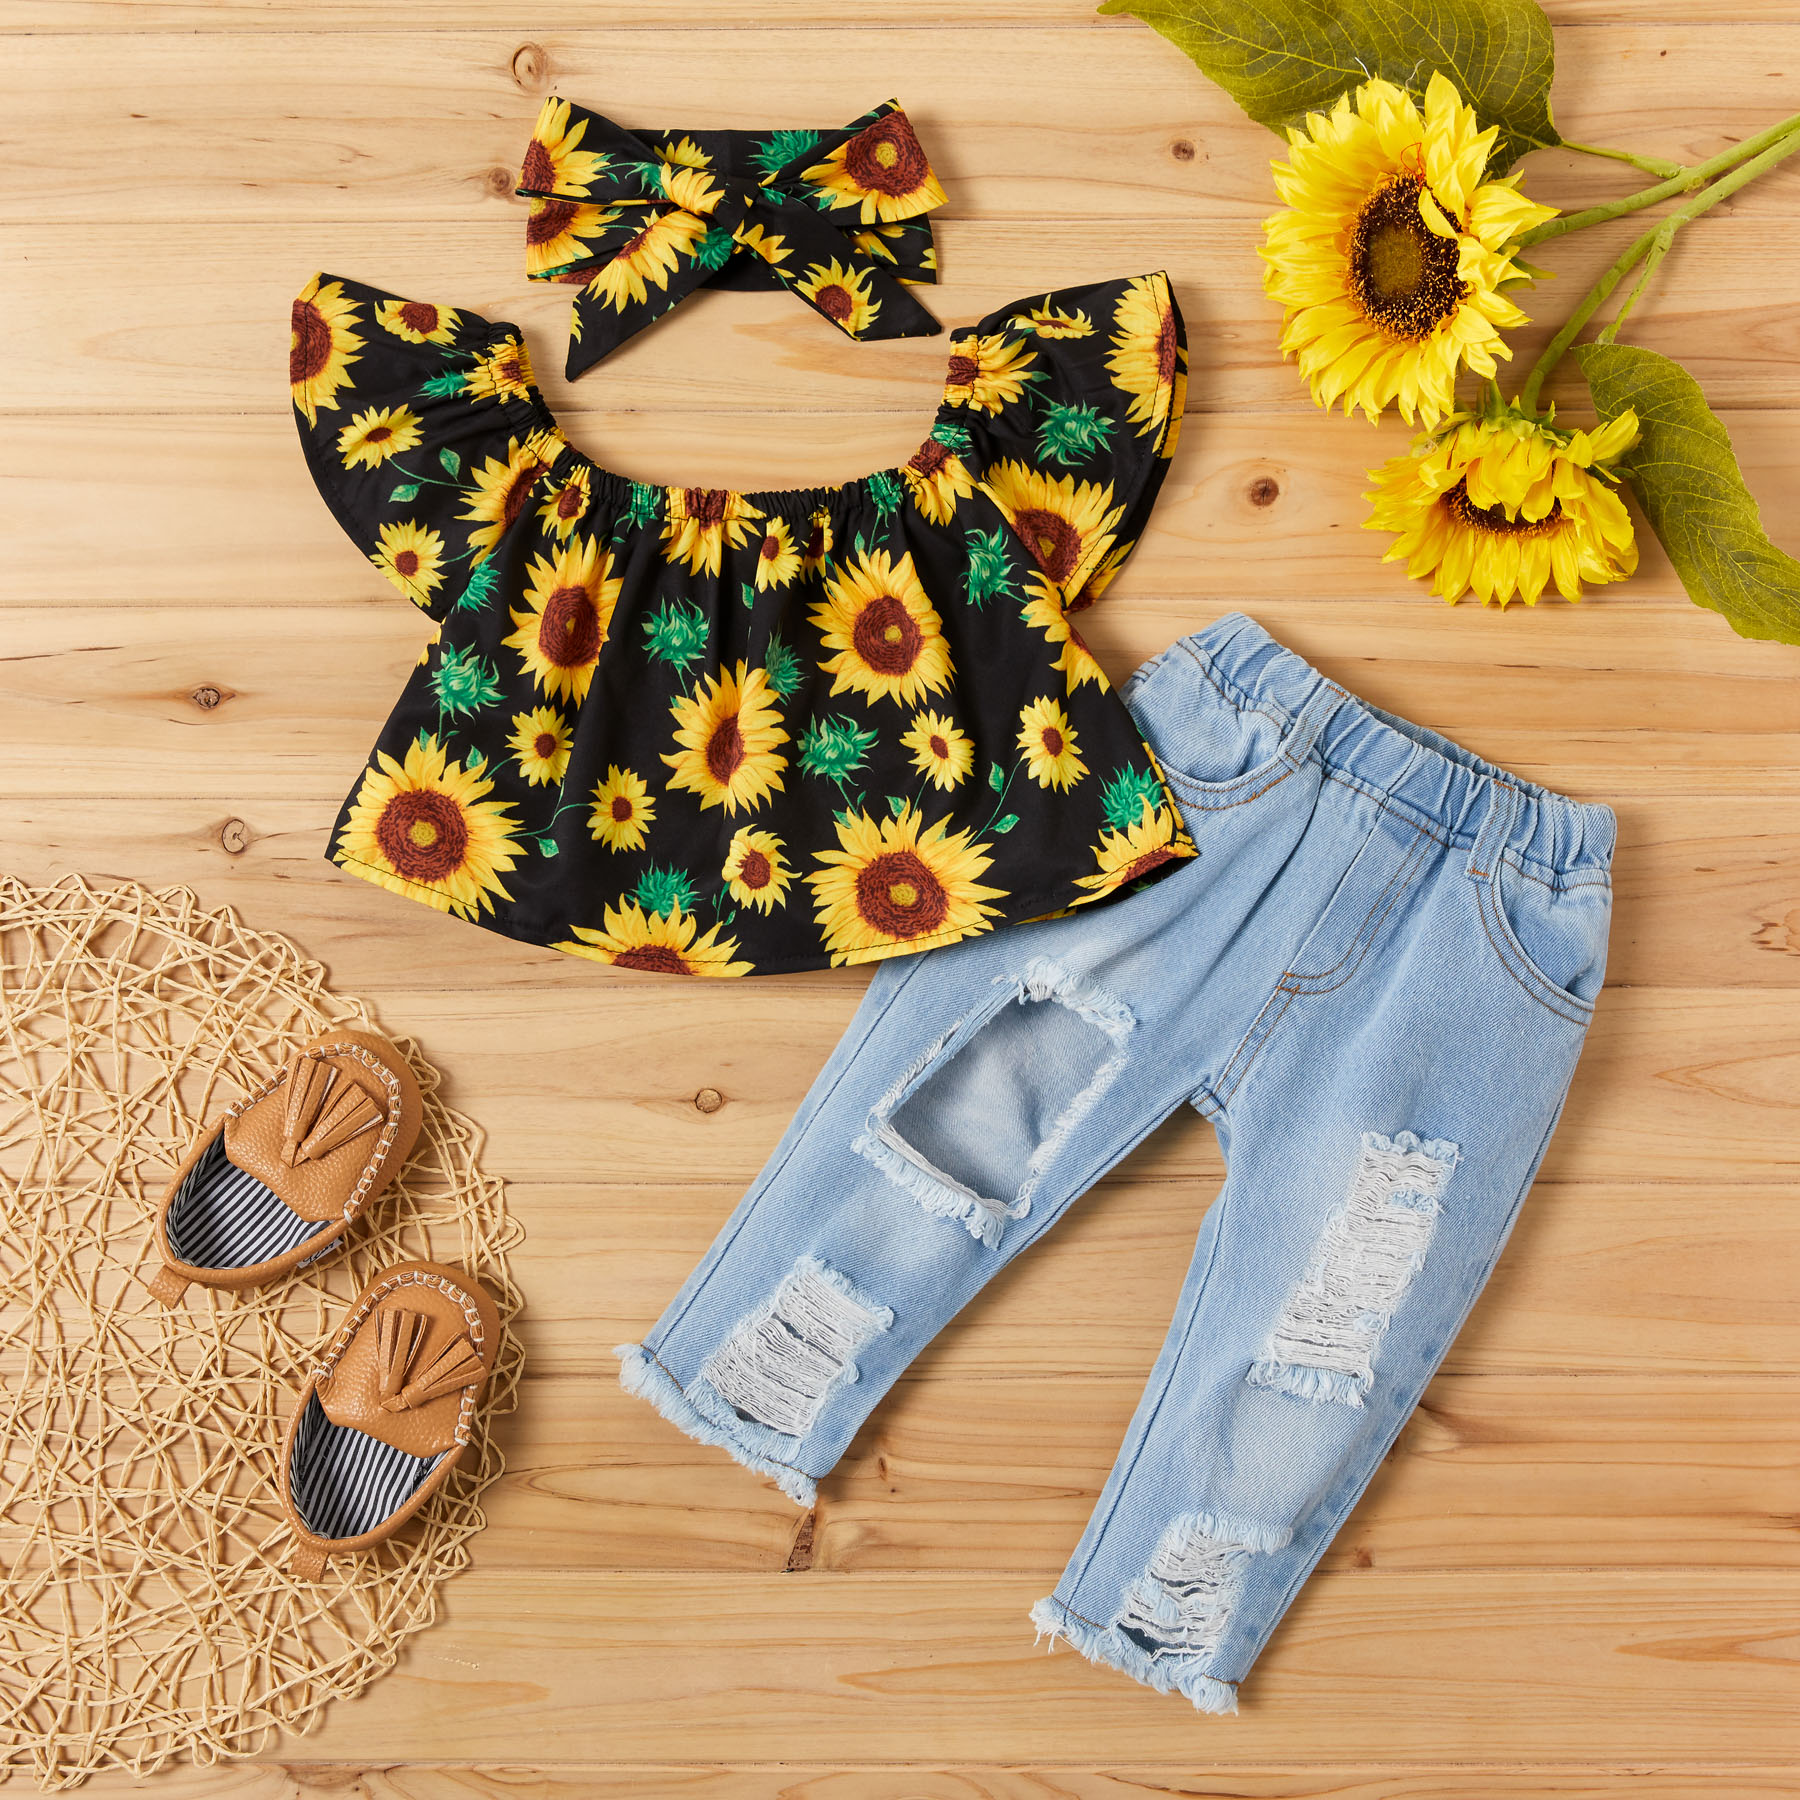 

Patpat 3pcs Baby Girls Stylish Outfit - Sunflower Print Short-sleeved Crop Top & Ripped Jeans Set With Free Headband